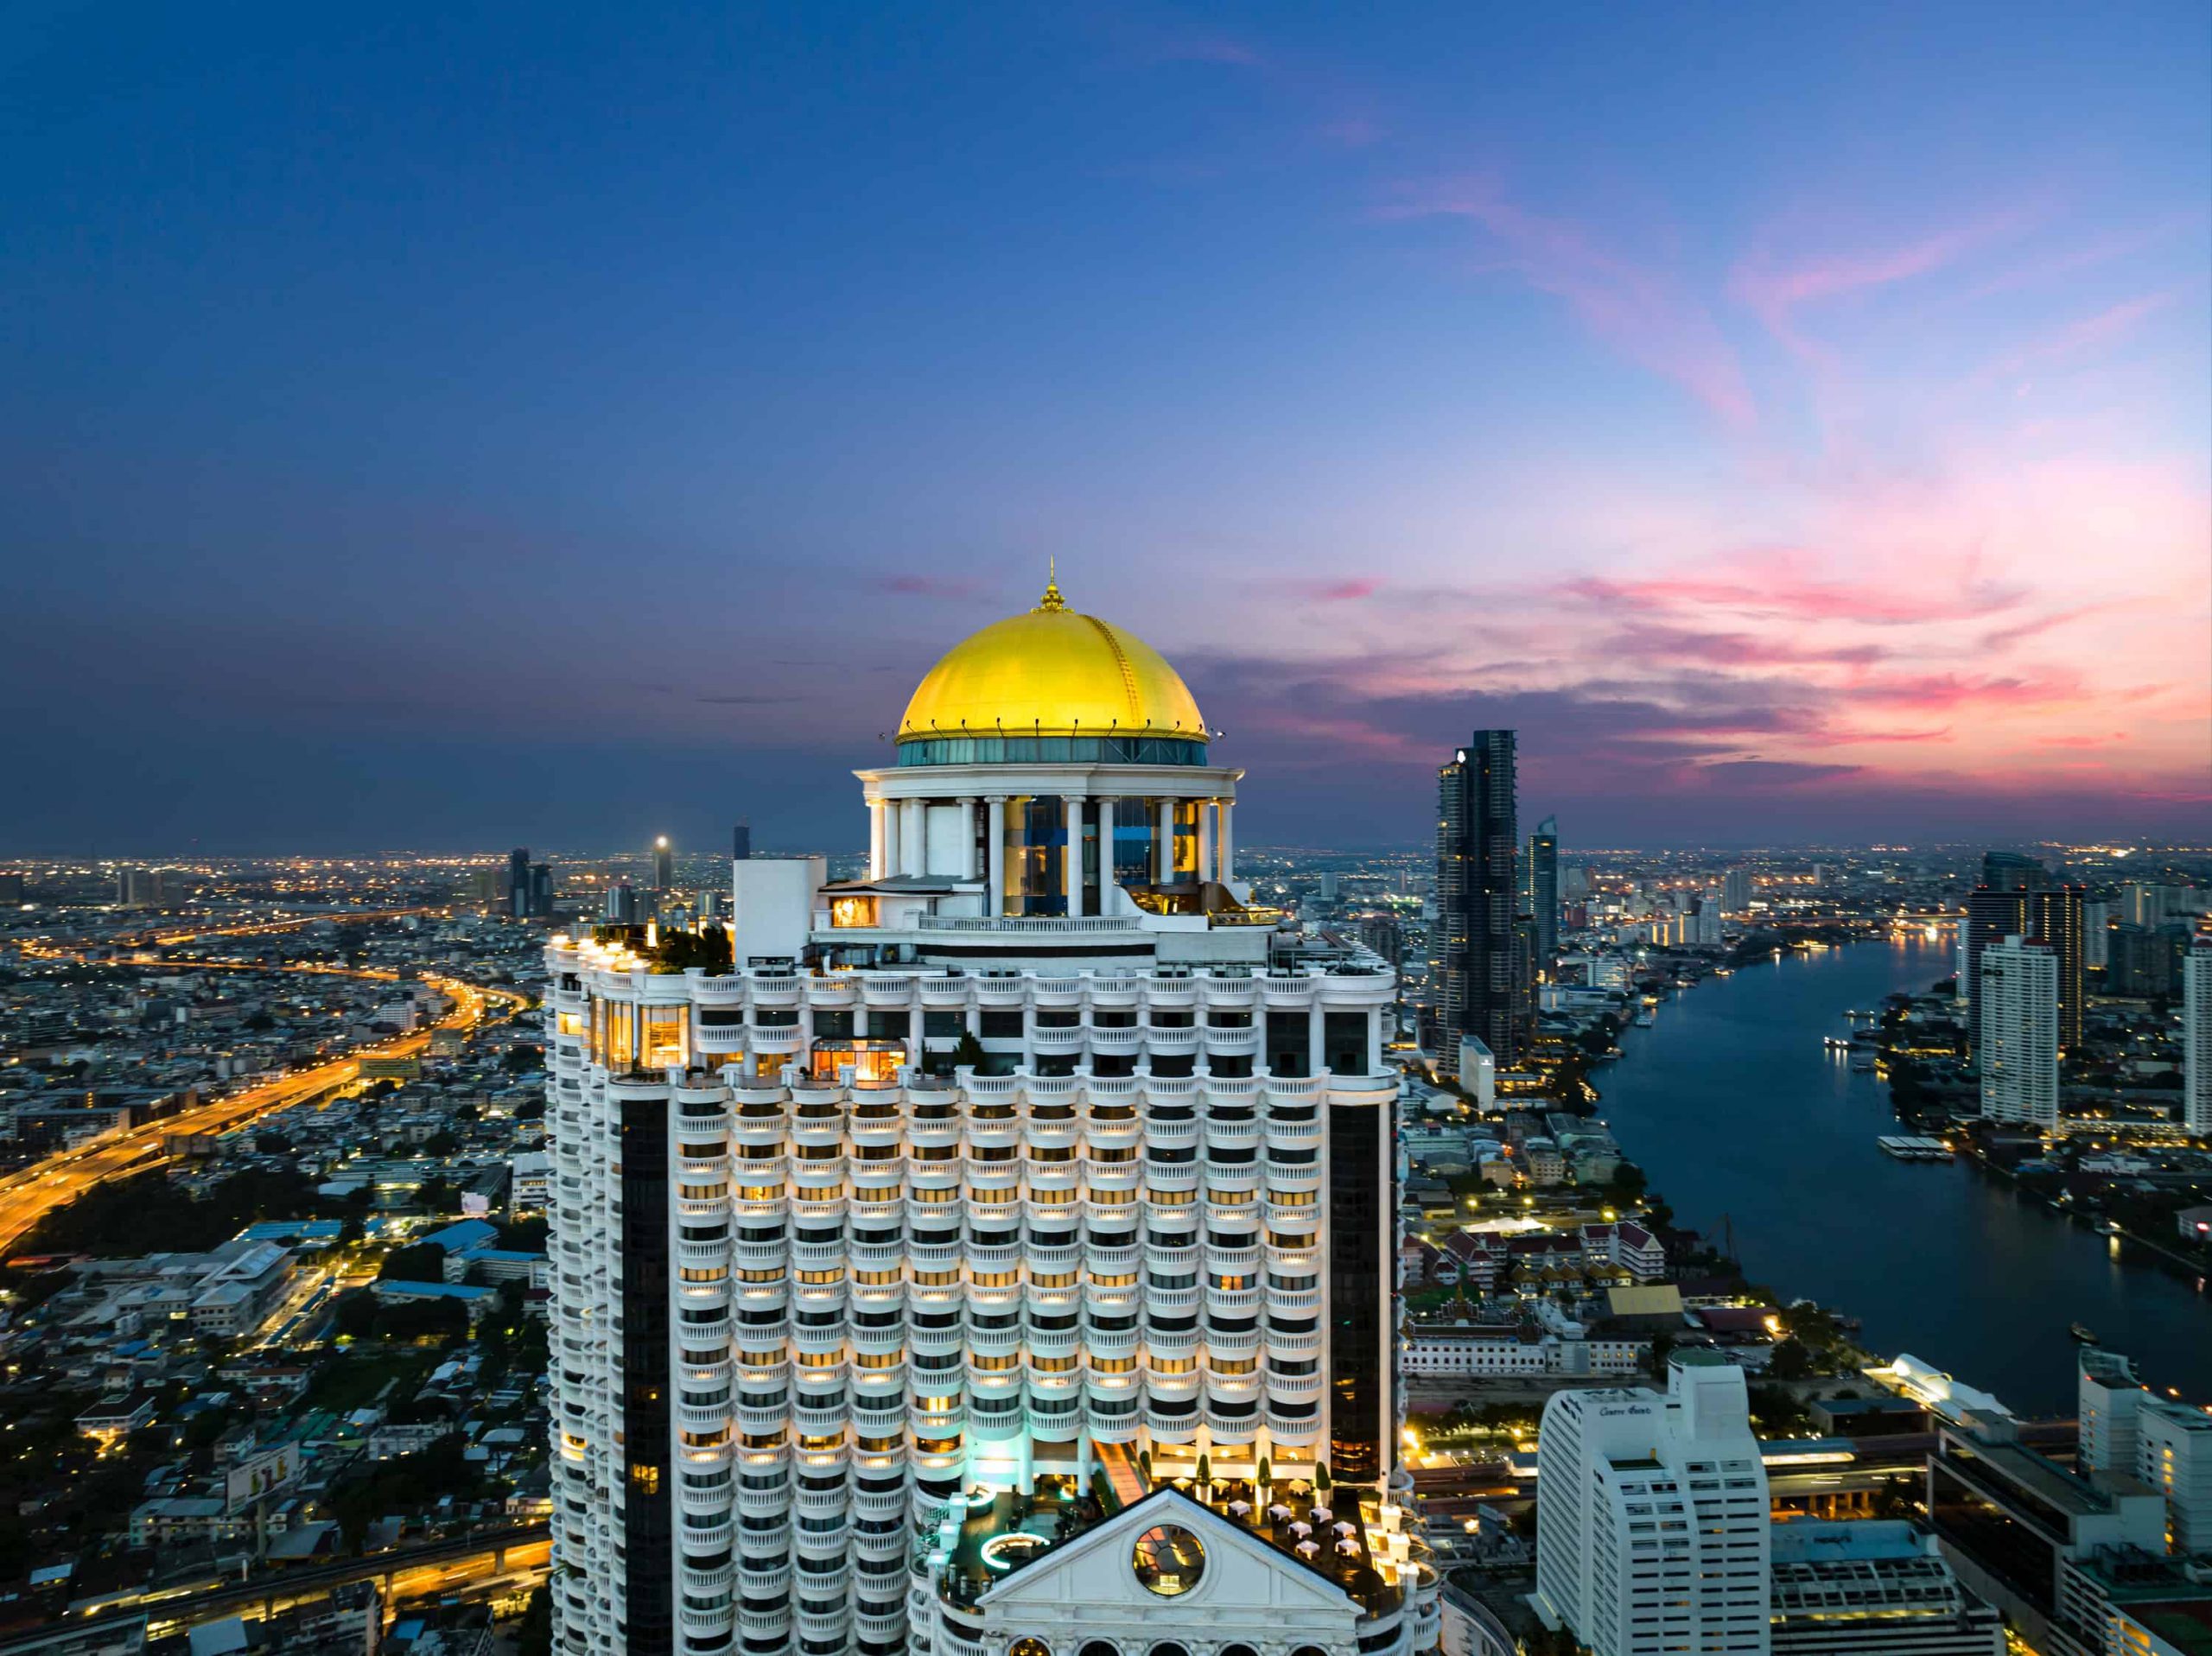 lebua at State Tower The Best 5 Star Luxury Hotel in Bangkok, Thailand pic